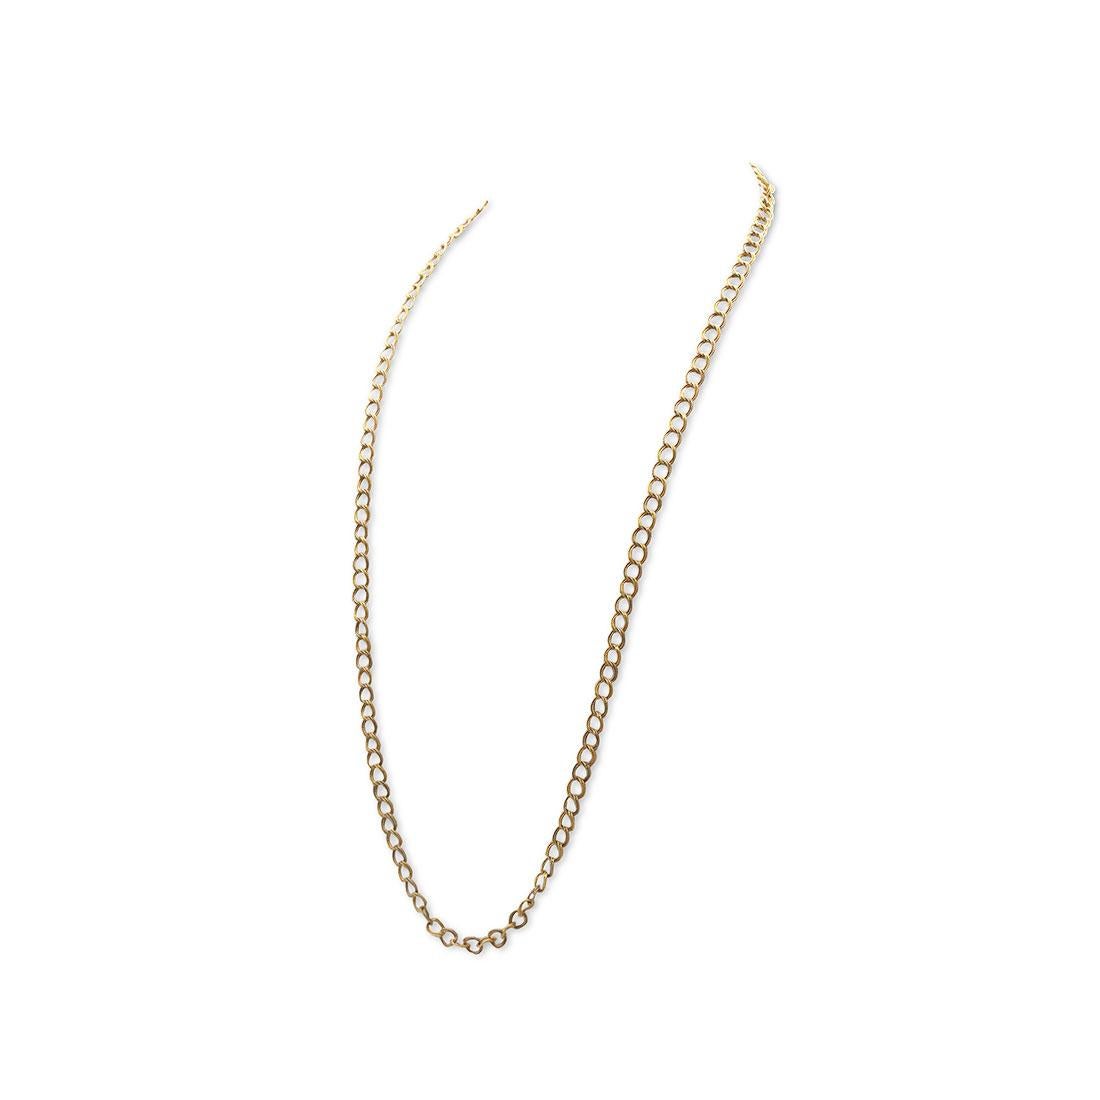 Vintage nautical-inspired link necklace crafted in 18 karat yellow and white gold.  The alternating rope-textured links measure 7.5mm wide. The necklace measure 17.5 inches in length. Stamped 750, 195T0. The necklace is not presented with the